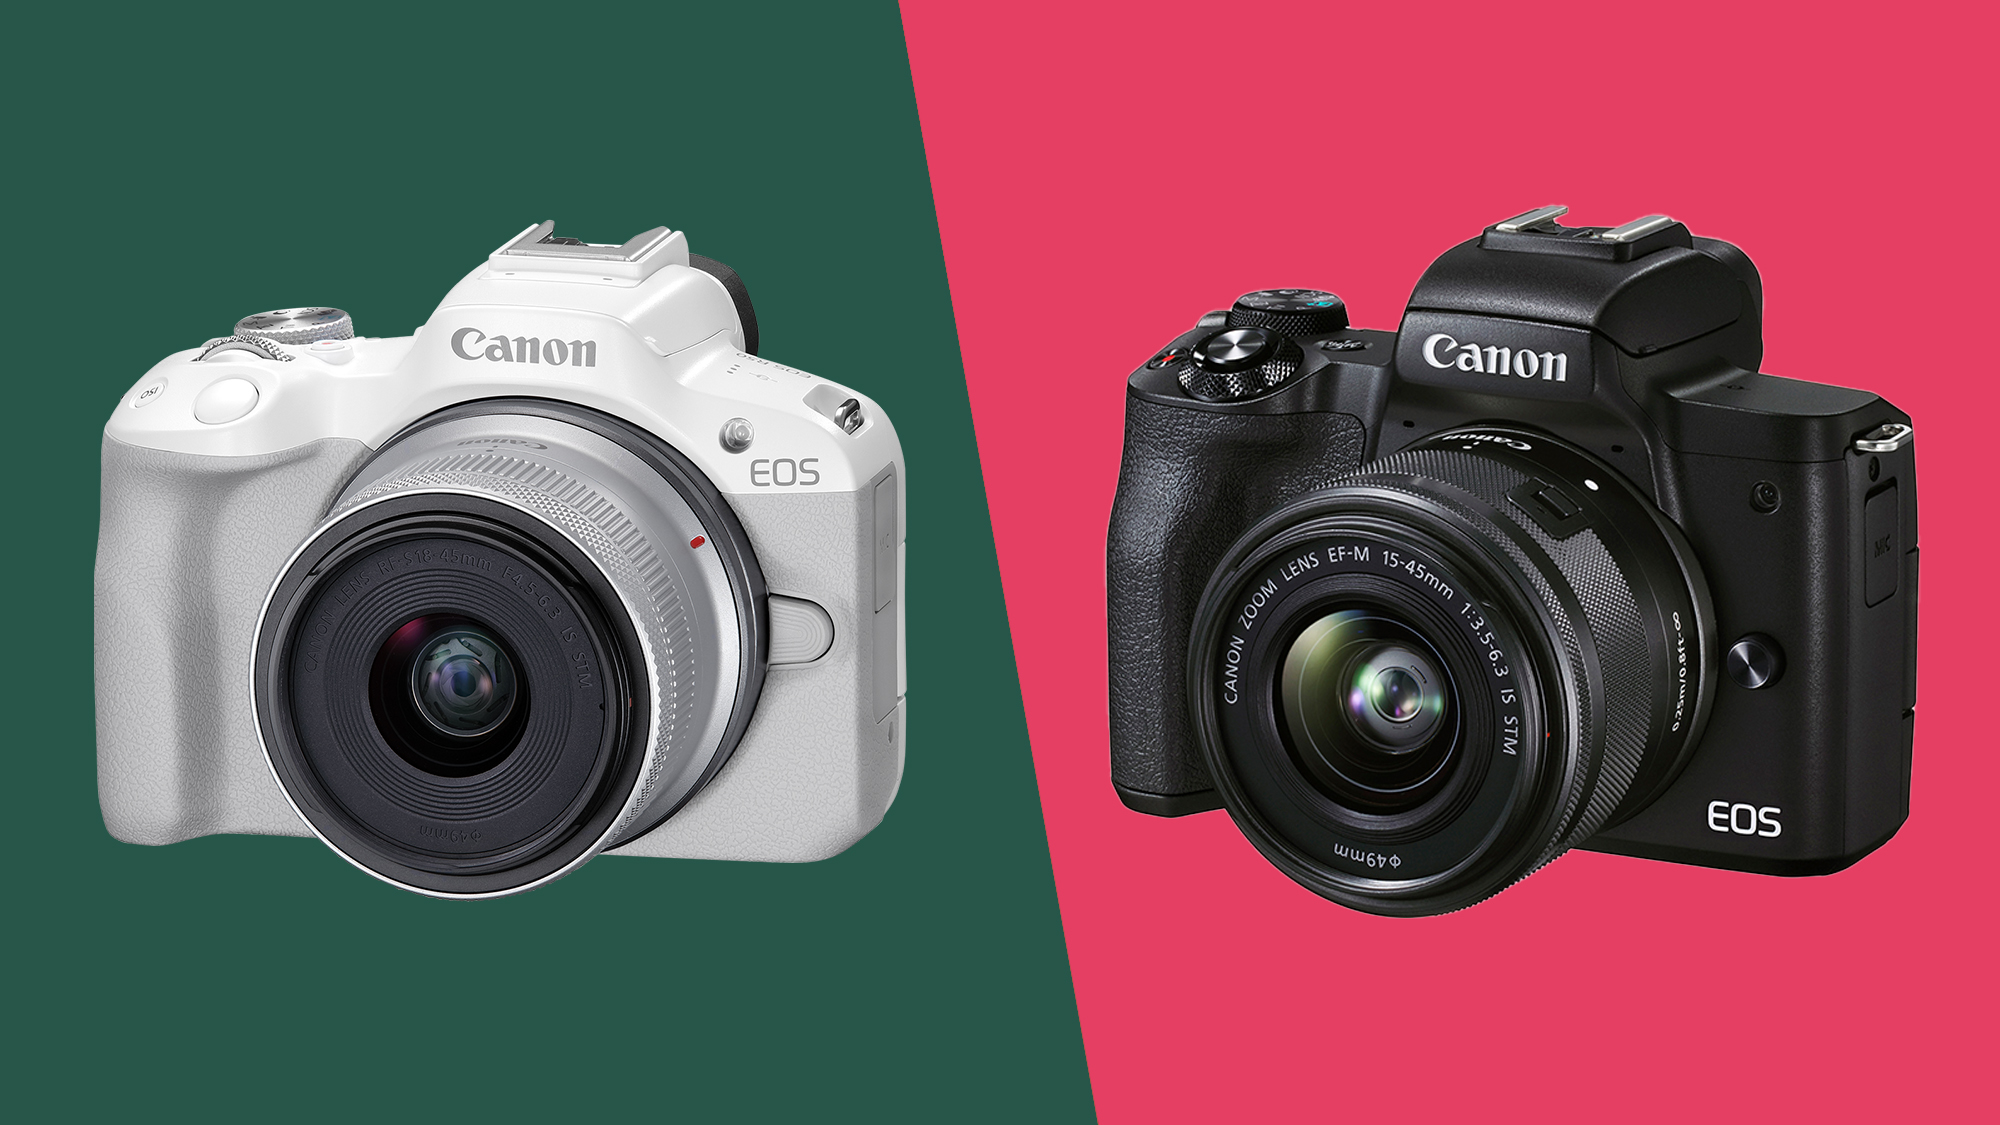 Is the Canon EOS M50 Mark II still worth buying?